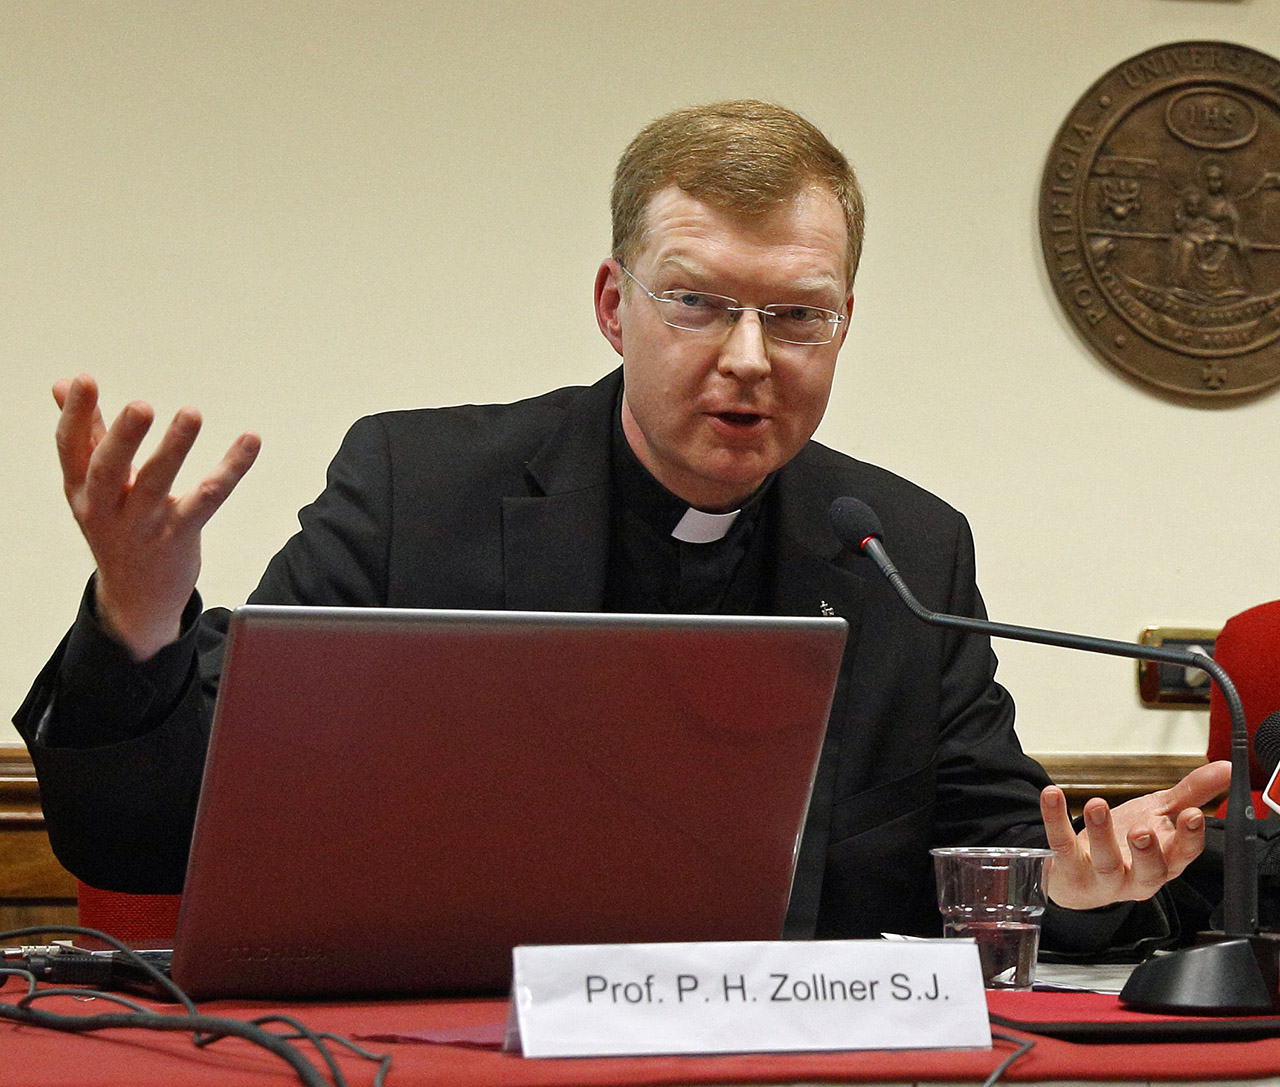 Jesuit Father Hans Zollner speaks at news conference for official launch of Center for Child Protection in Rome